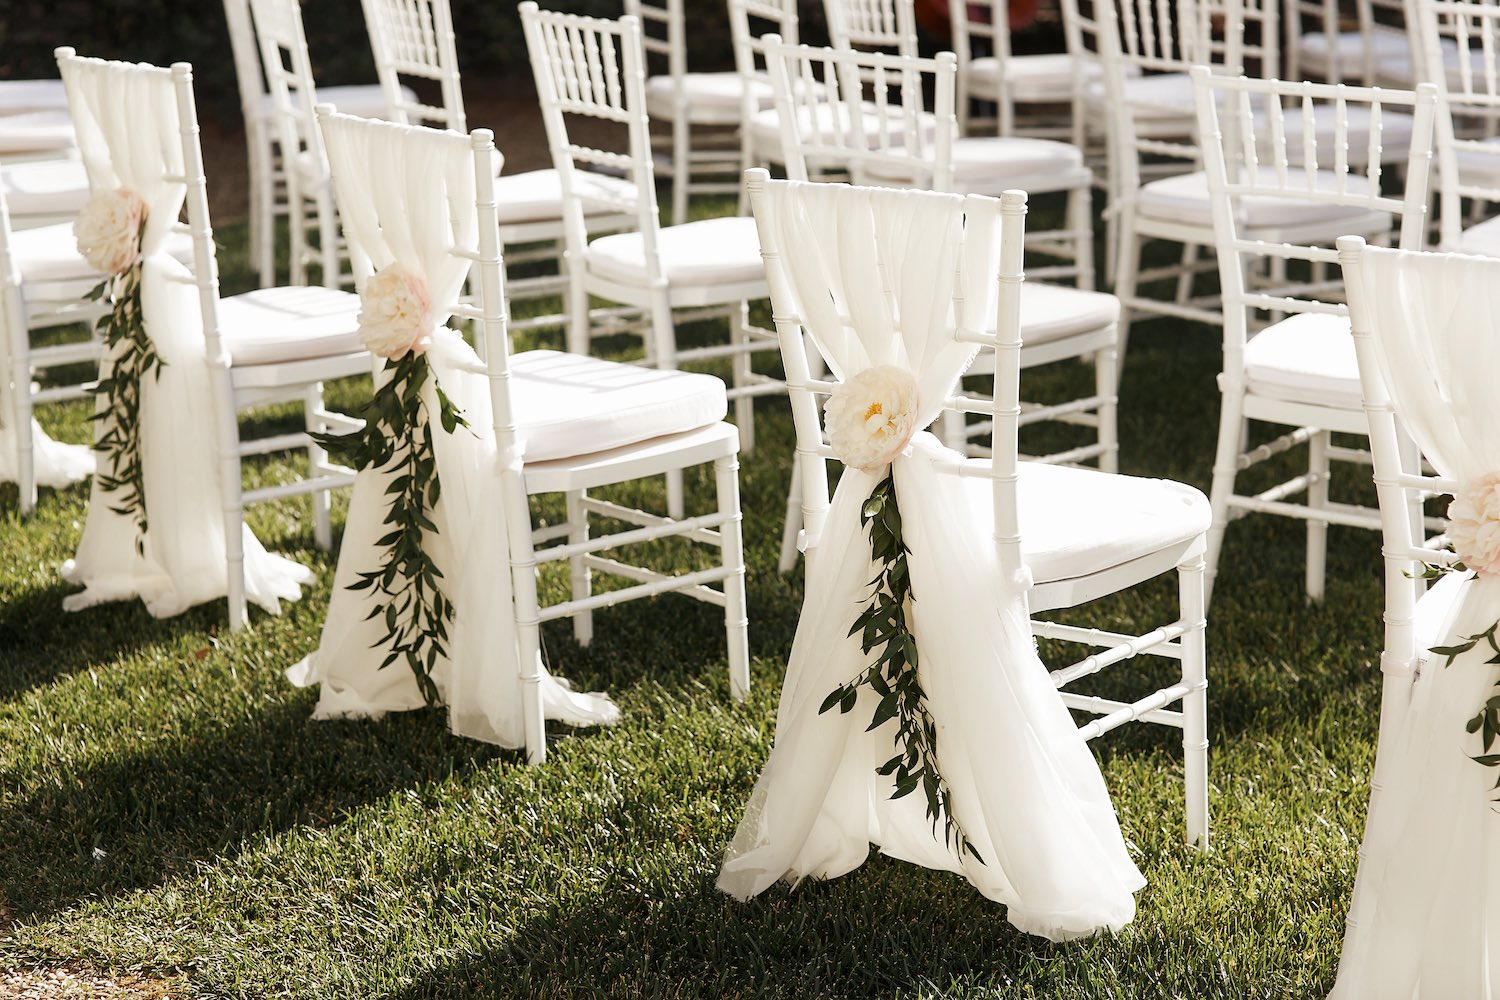 Assembled white wedding chairs